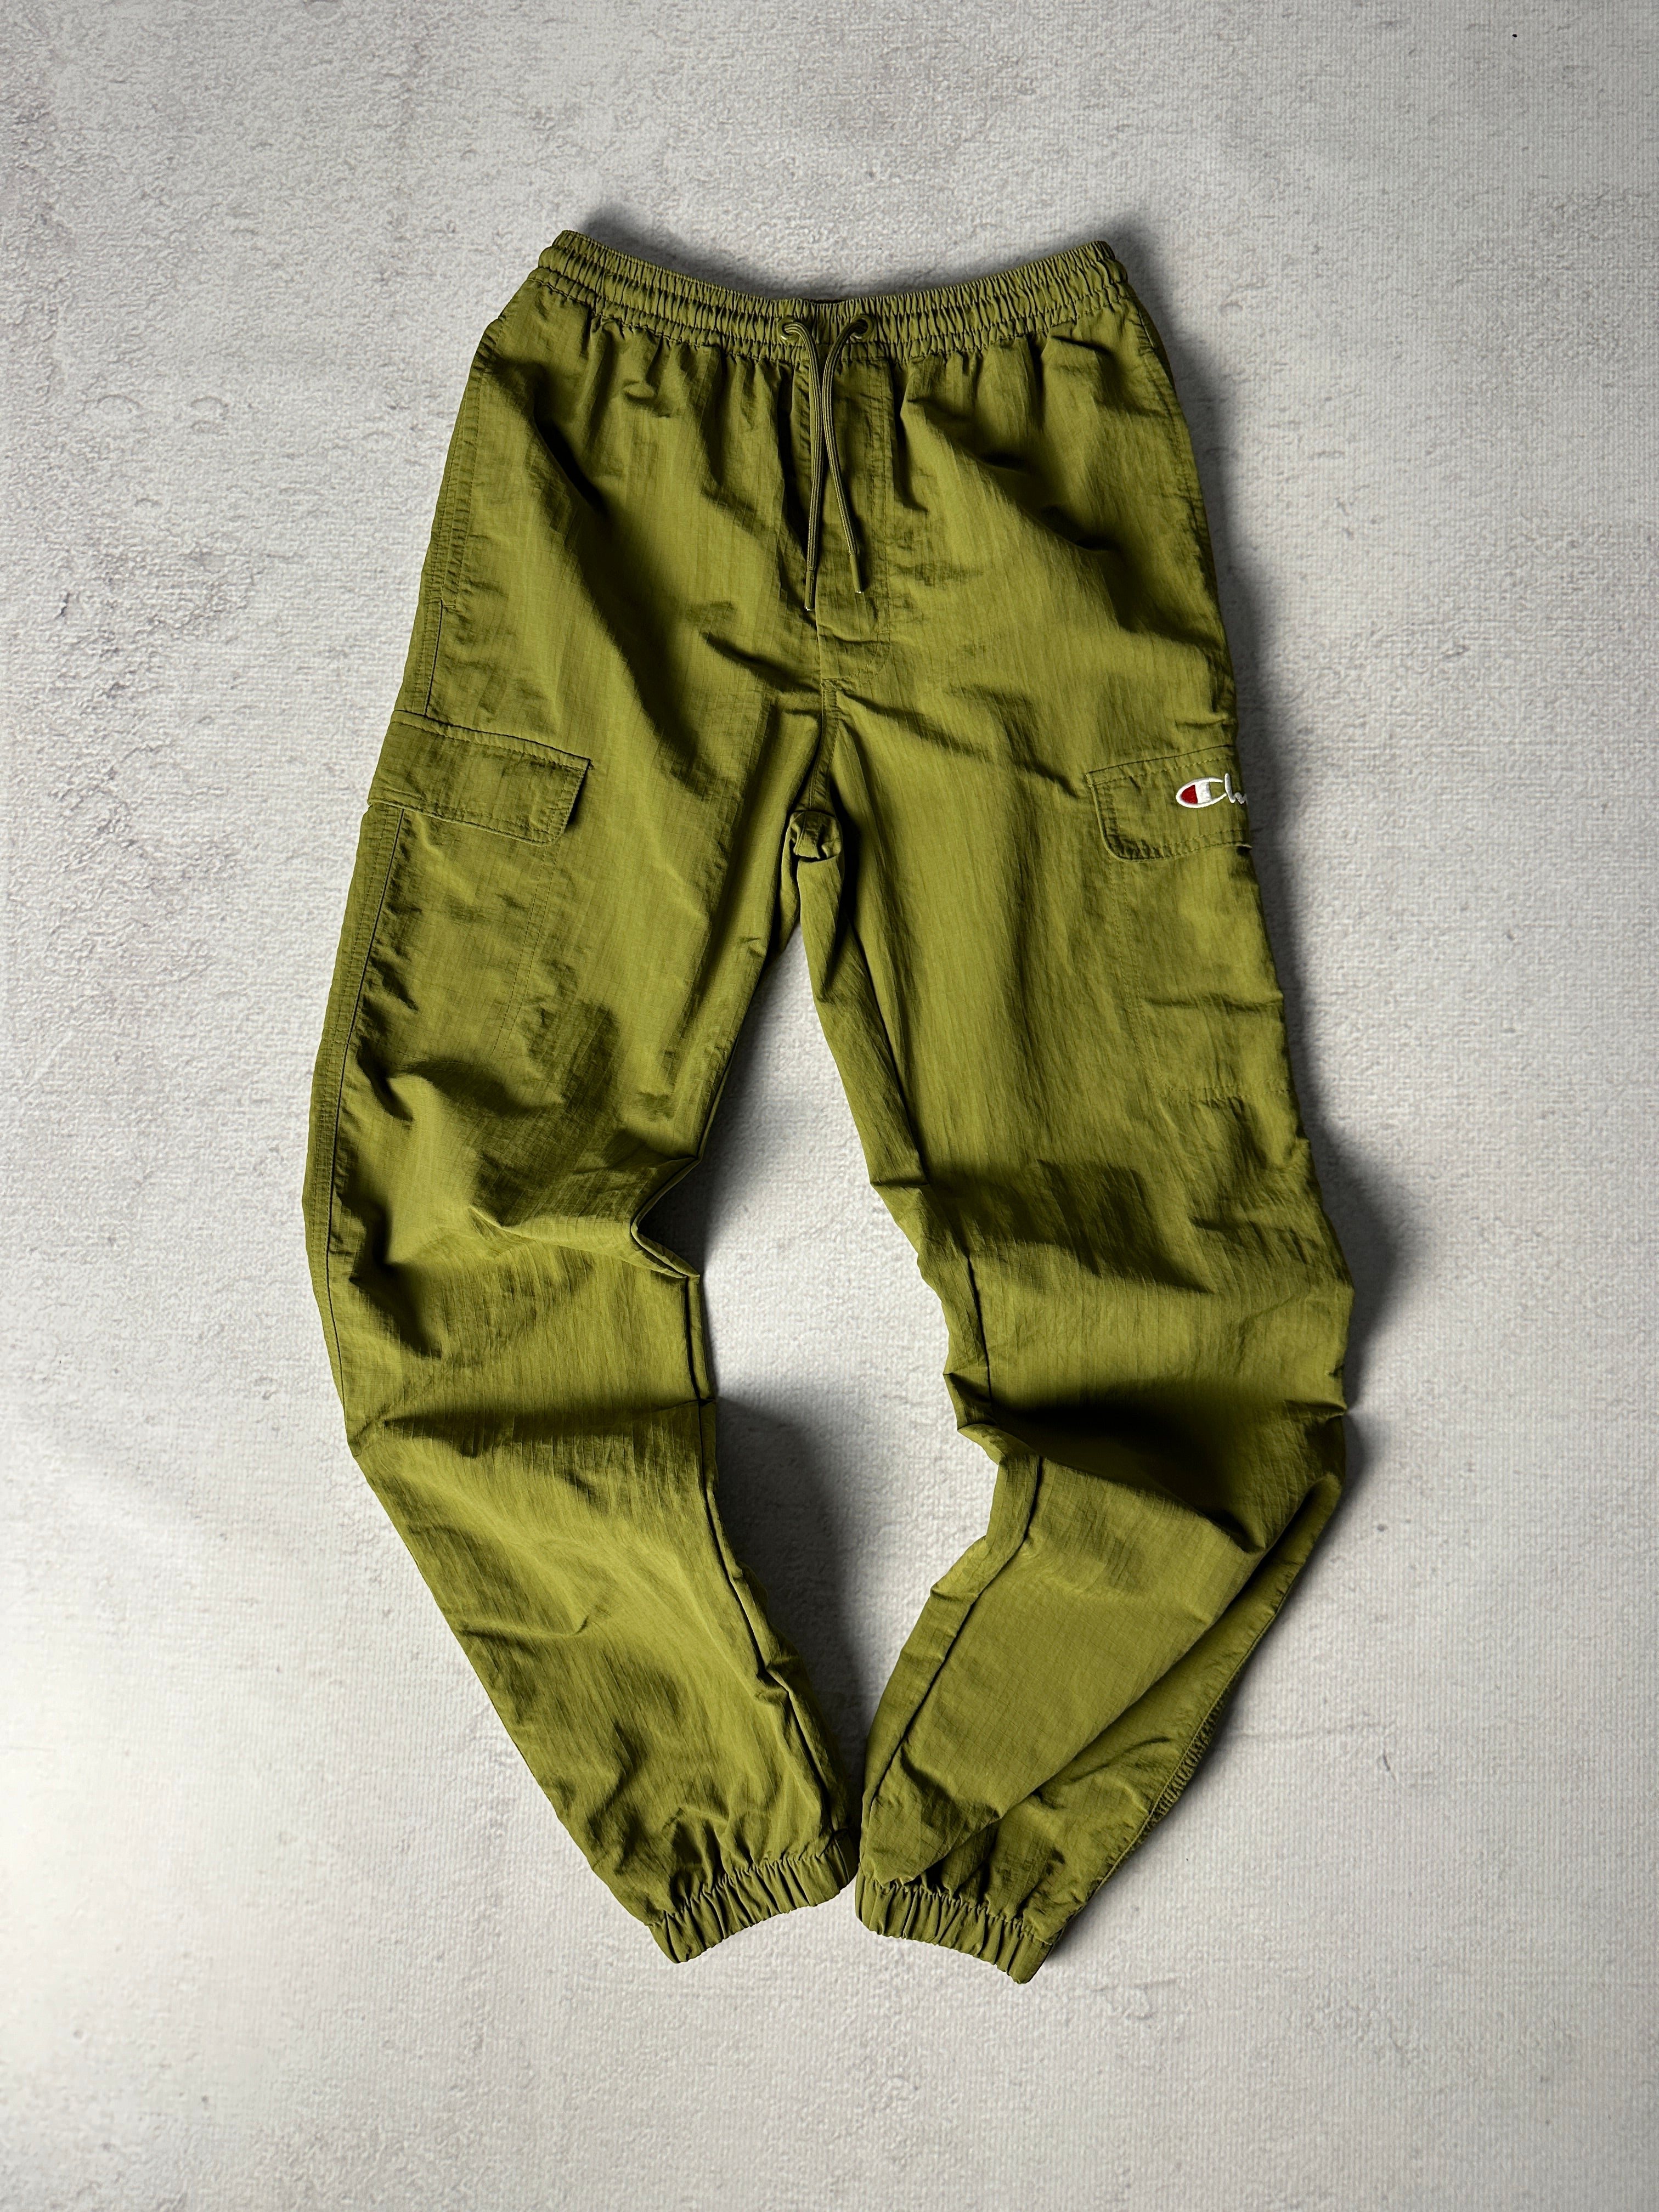 Vintage Champion Cuffed Cargo Track Pants - Women's Small